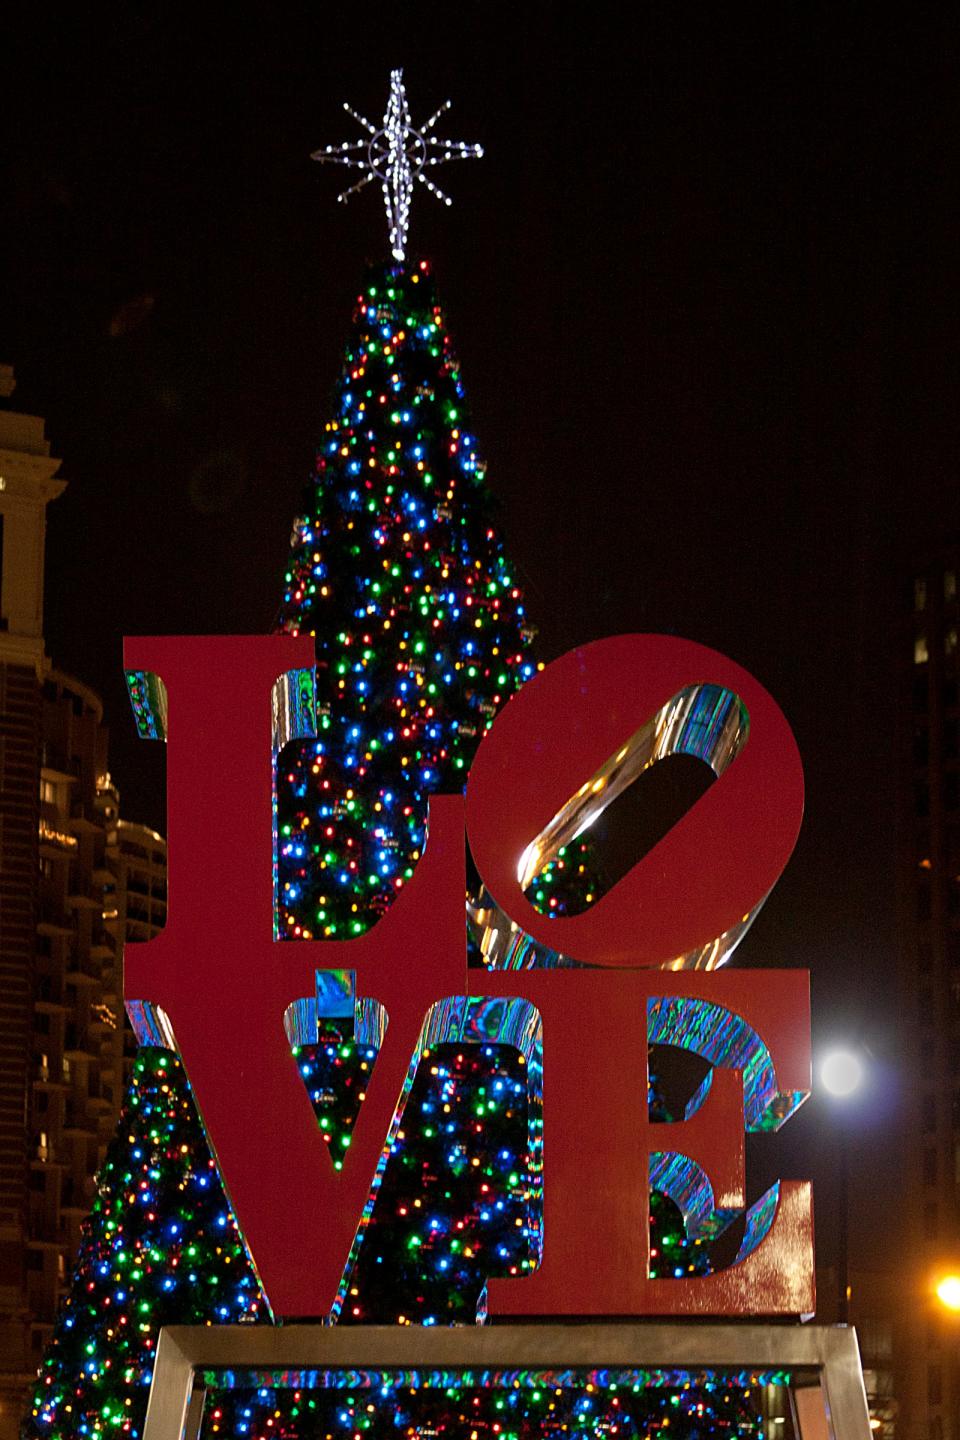 A Christmas tree is displayed behind Robert Indiana’s famous LOVE statue in Philadelphia’s  LOVE Park.